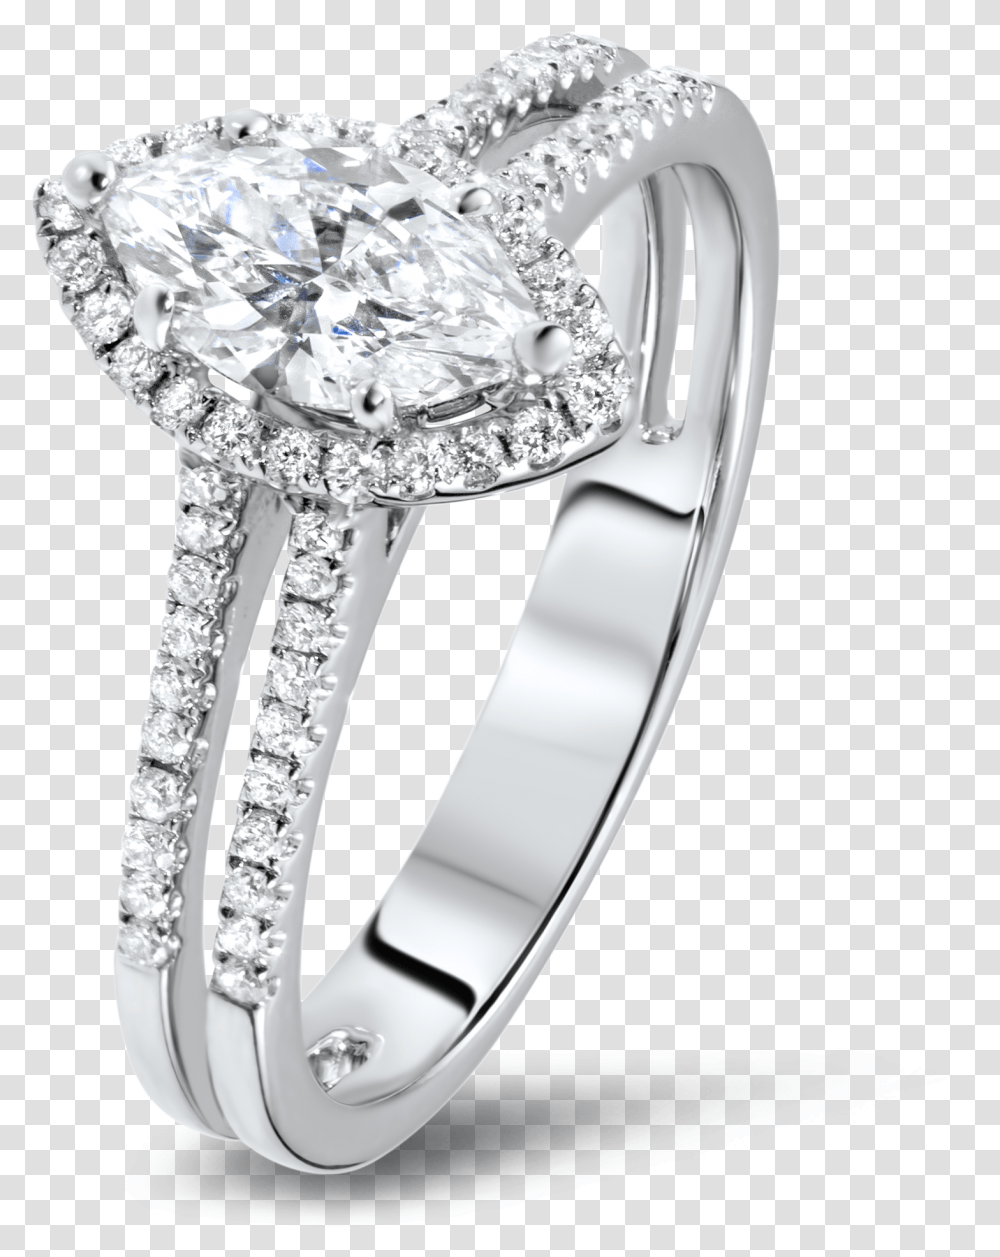 Diamond Ring In 18k White Gold Pre Engagement Ring, Platinum, Gemstone, Jewelry, Accessories Transparent Png